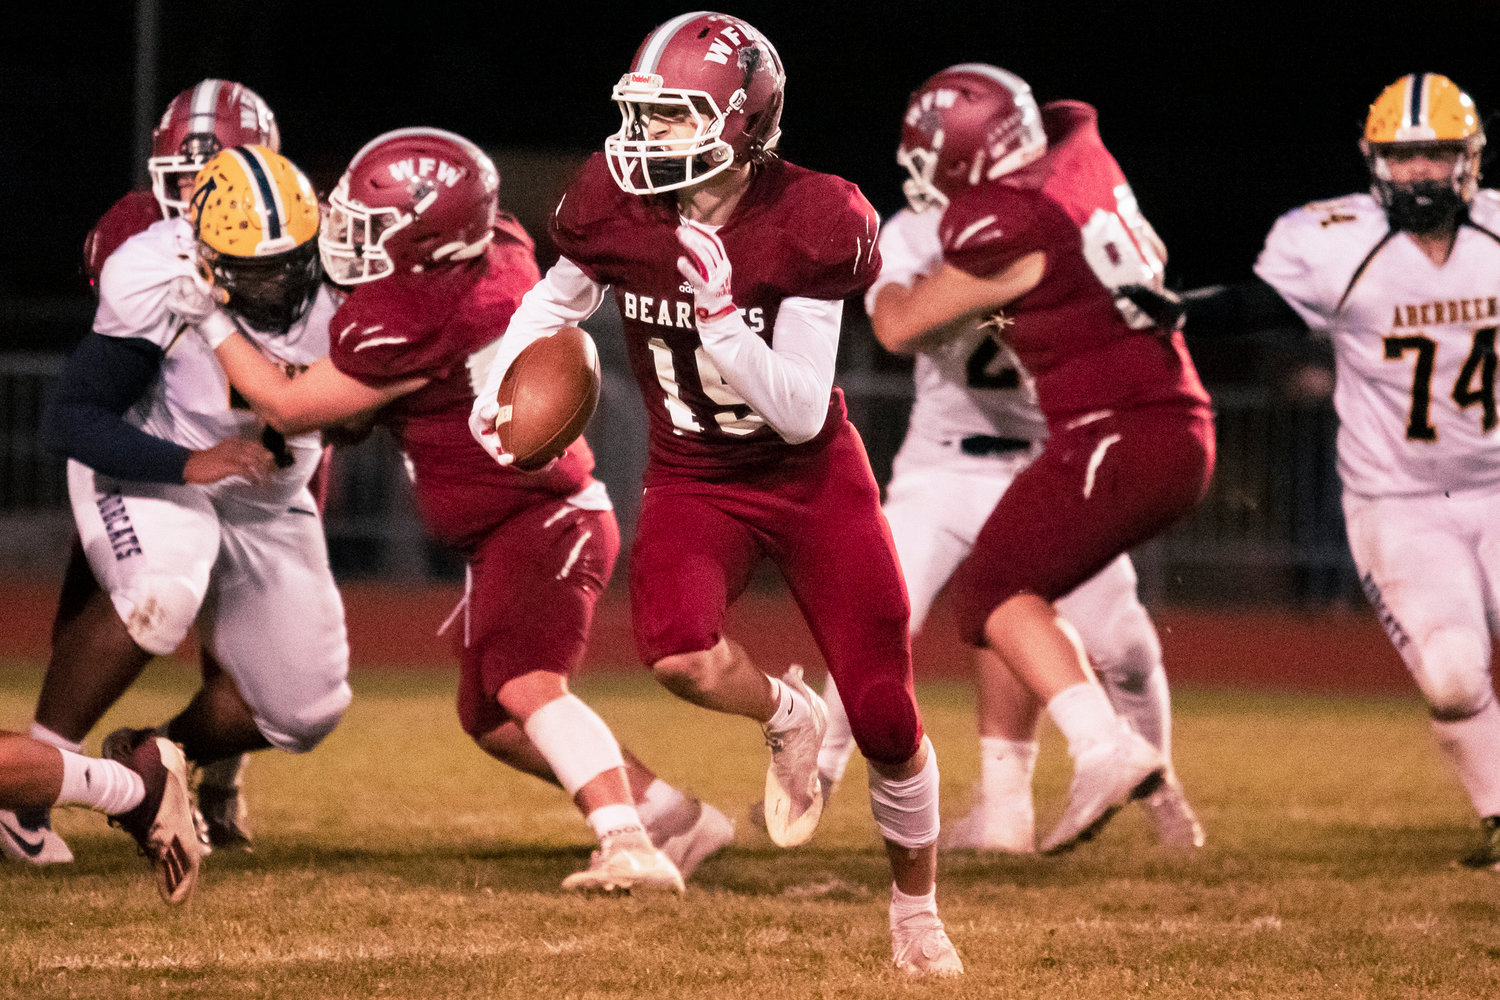 W.F. West’s Gage Brumfield (19) runs with the football during a game against Aberdeen Friday night at Bearcat Stadium in Chehalis.